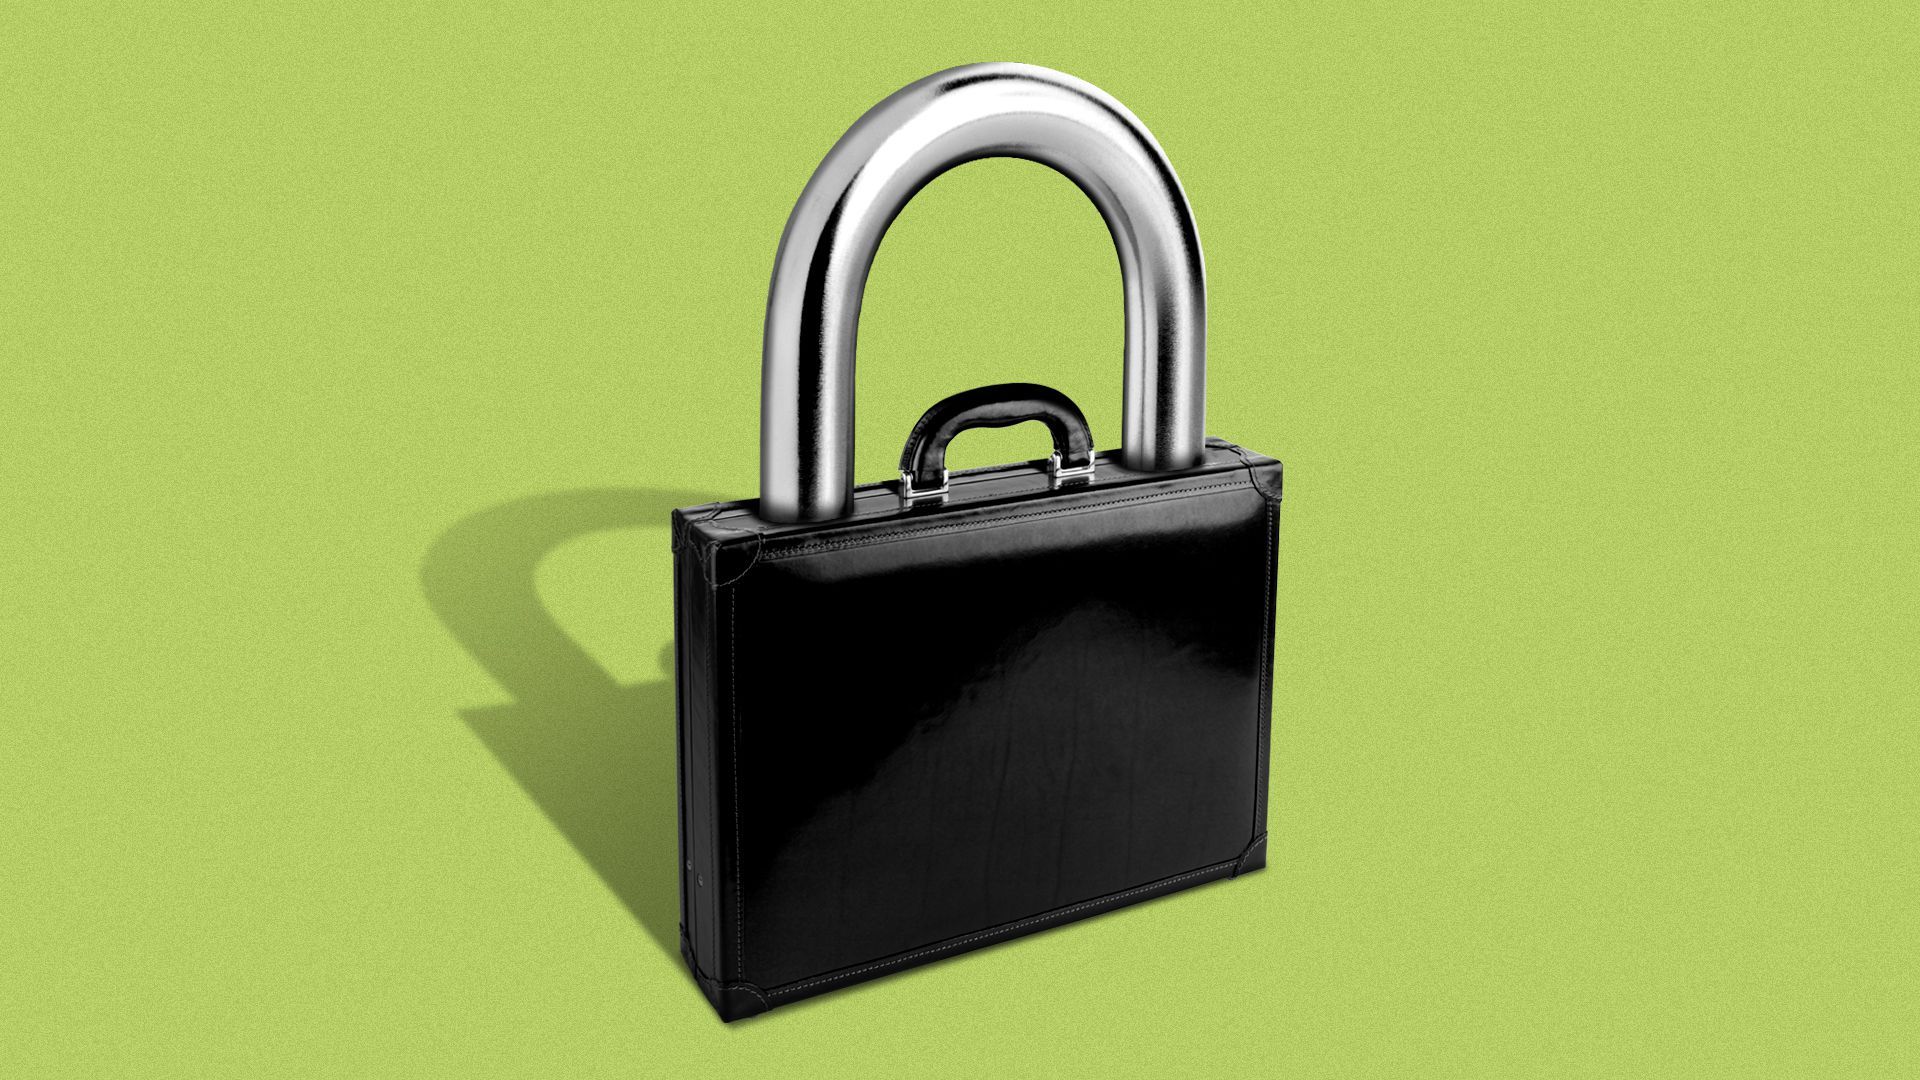 Illustration of a briefcase with a lock on it